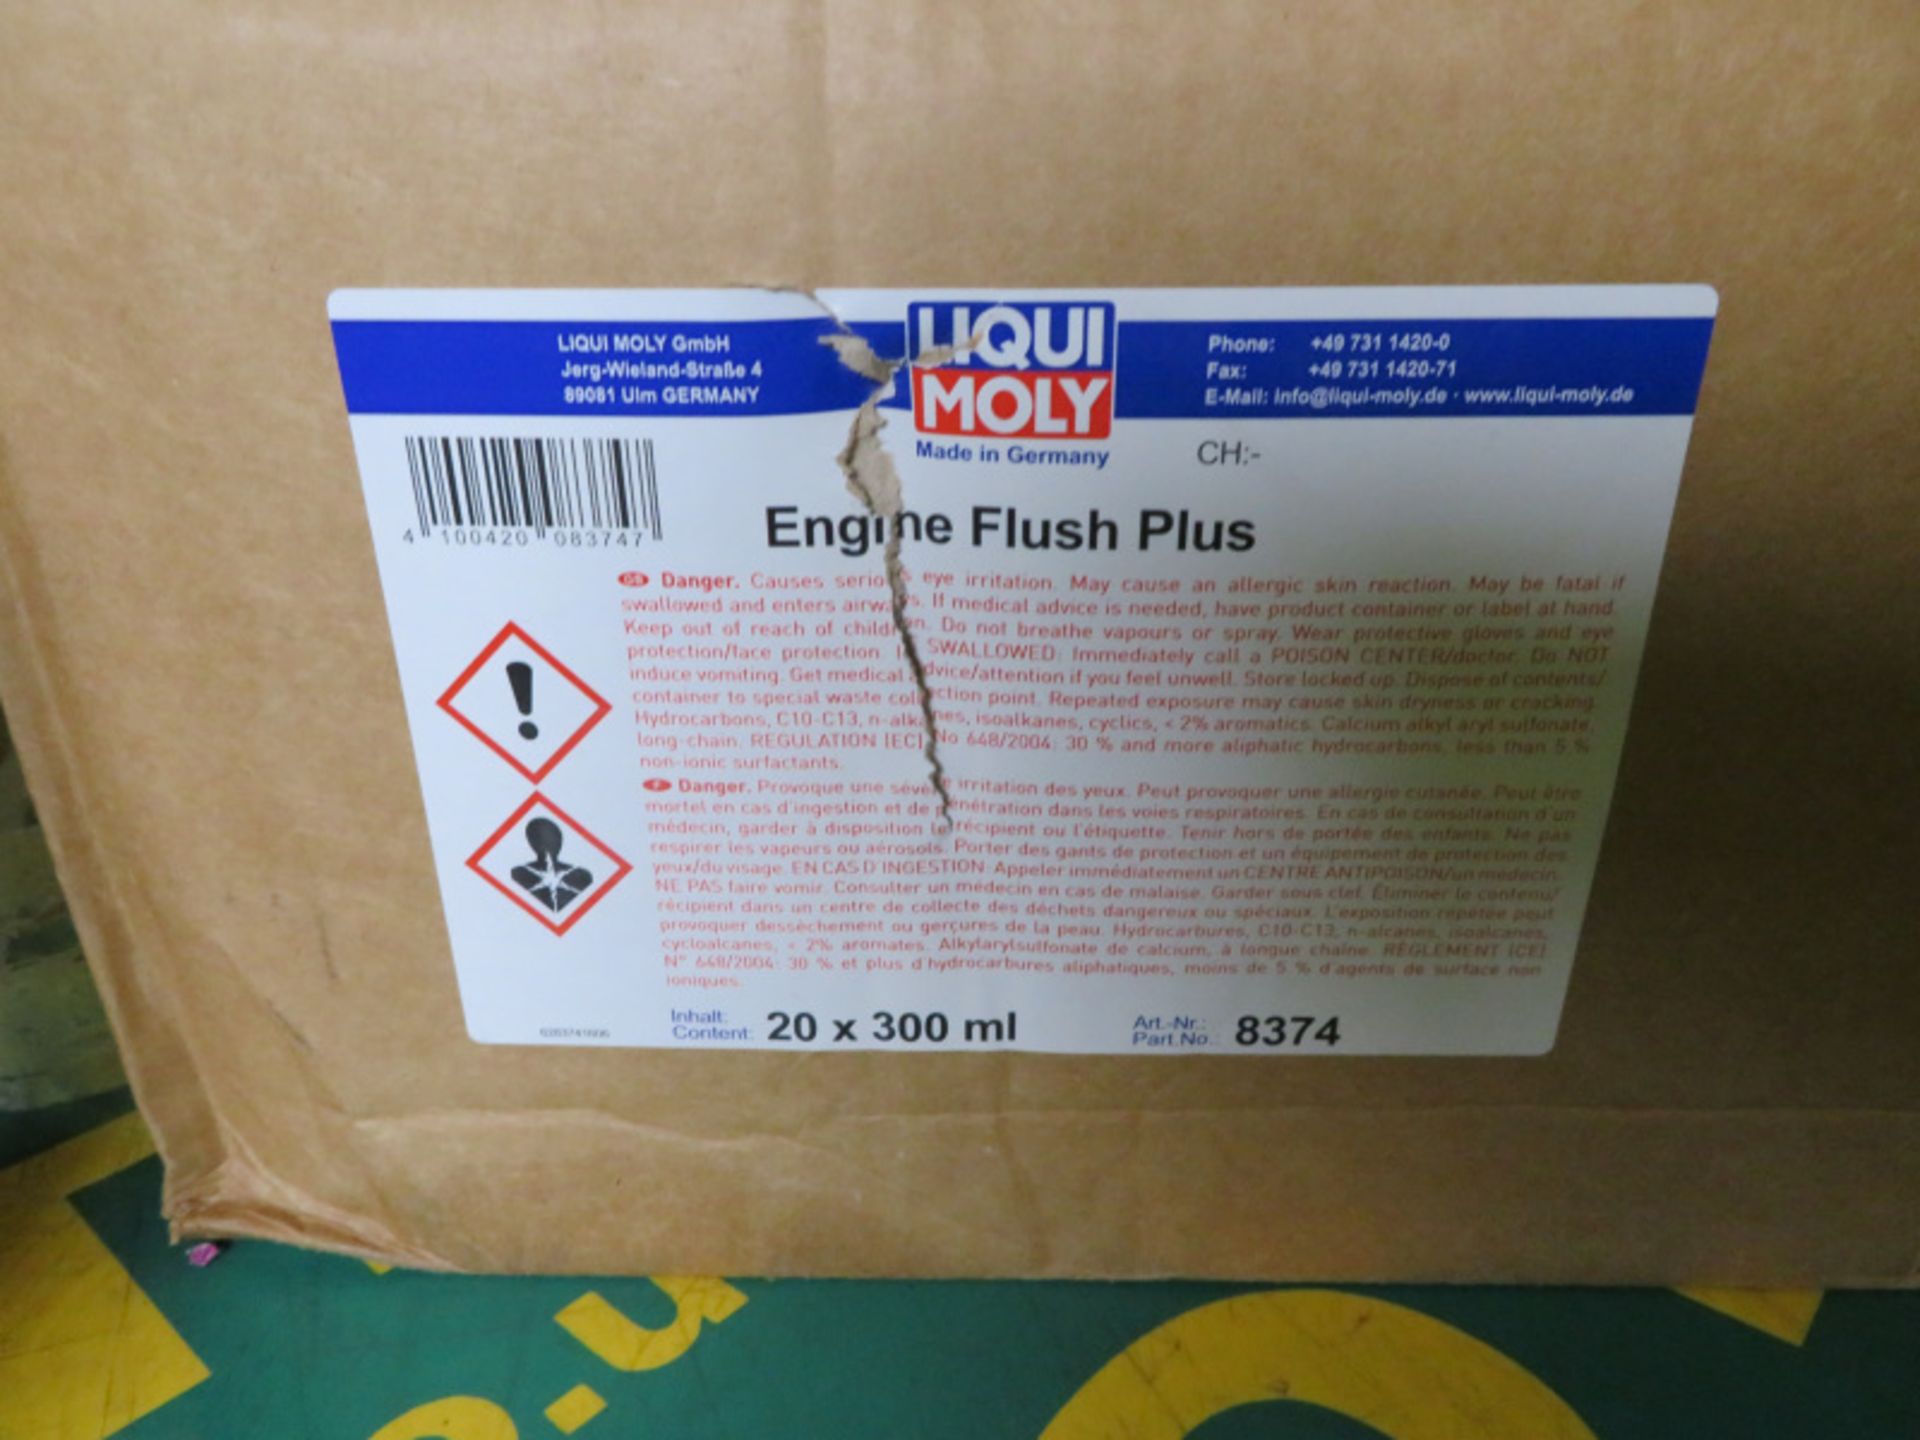 Liqui Moly fuel injection cleaner, Liqui Moly engine flush plus, Liqui Moly injection cleaner - Image 5 of 7